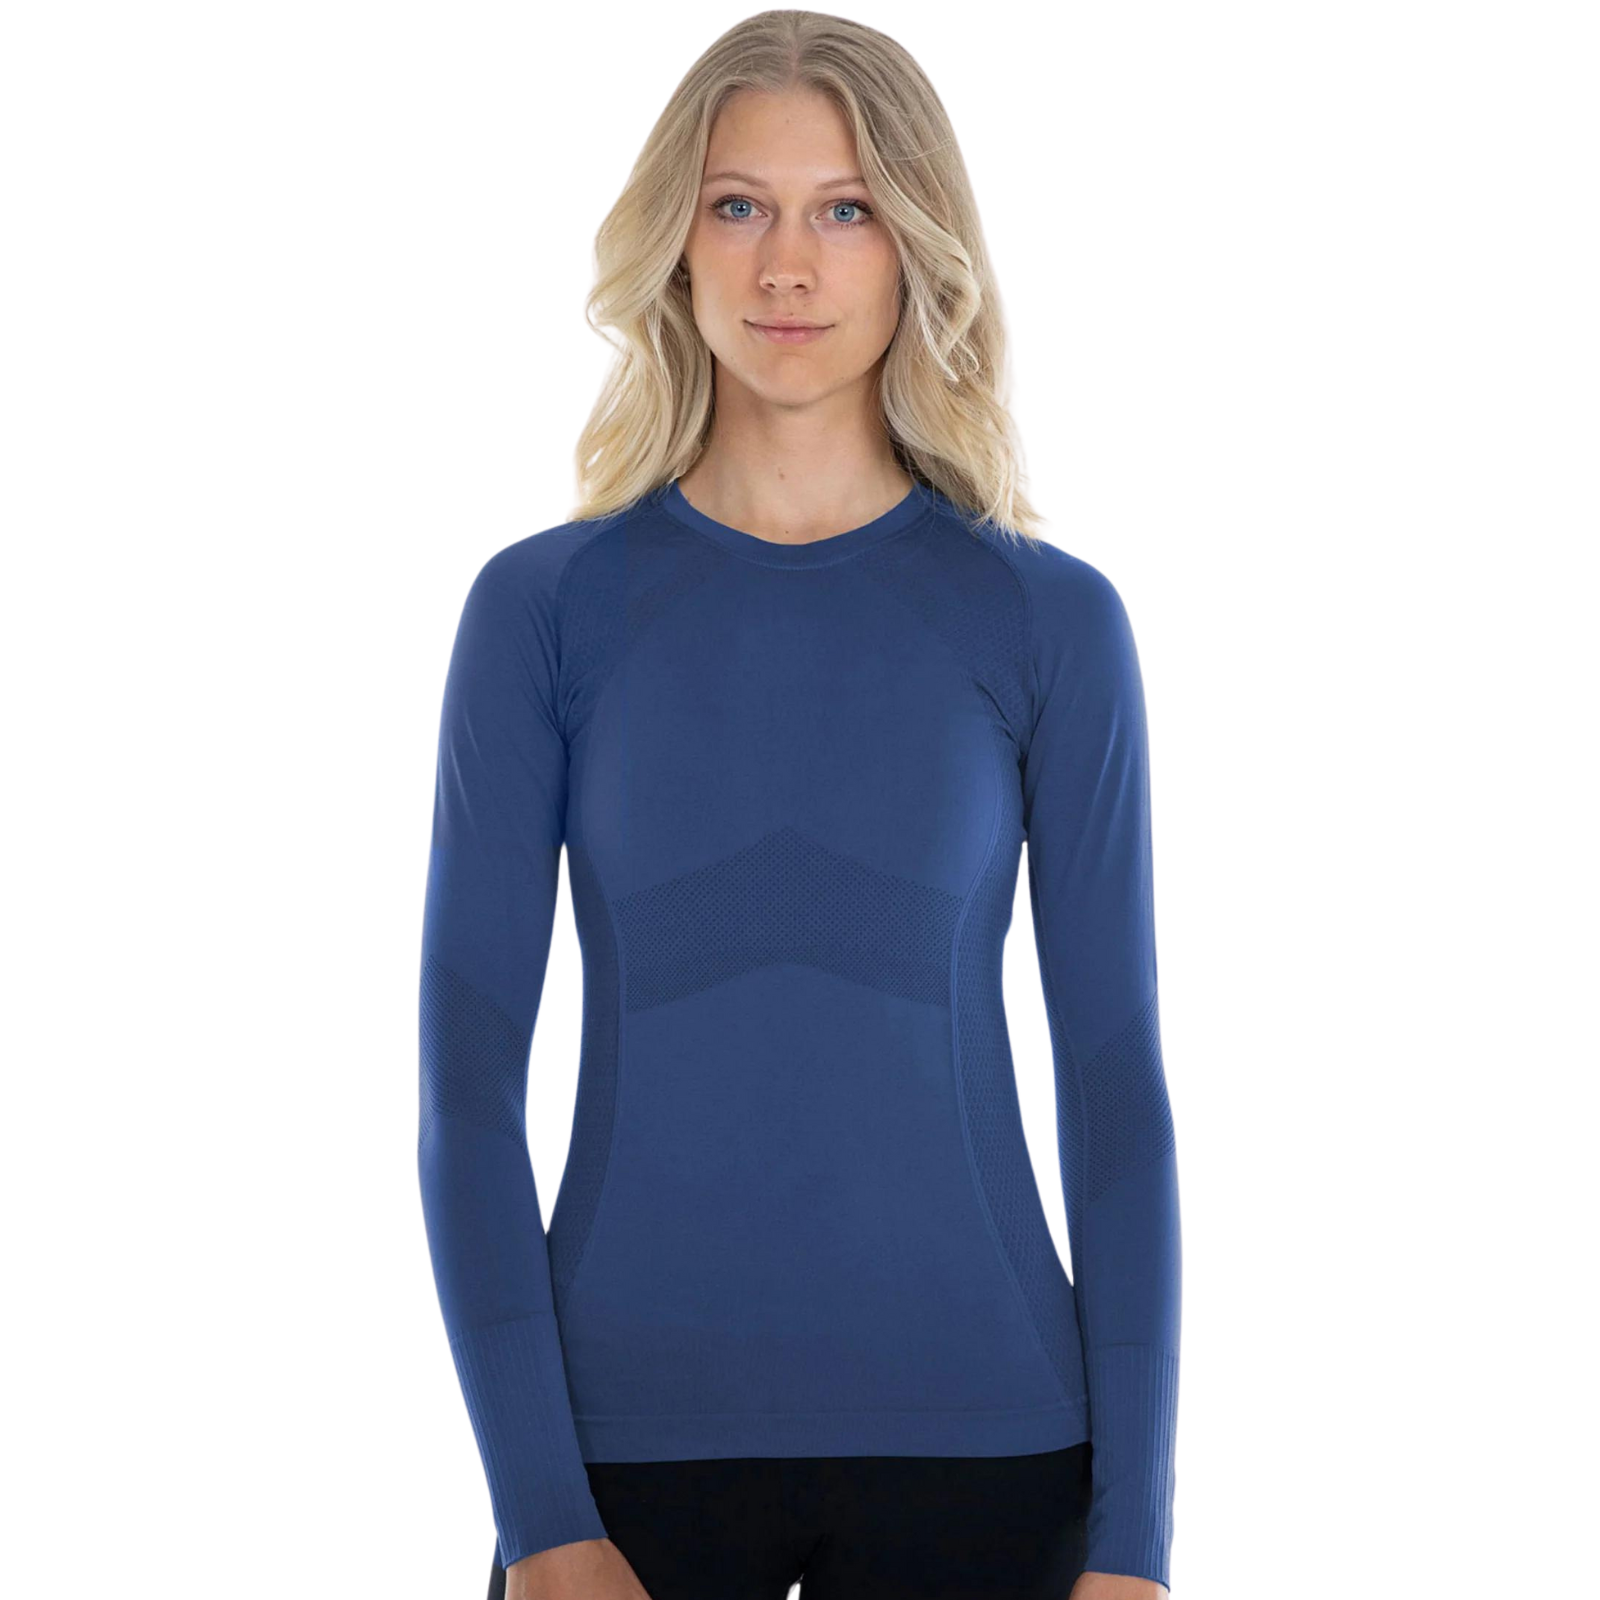 Anique Long Sleeve Crew Shirt in Blueberry - Women&#39;s XL (12)